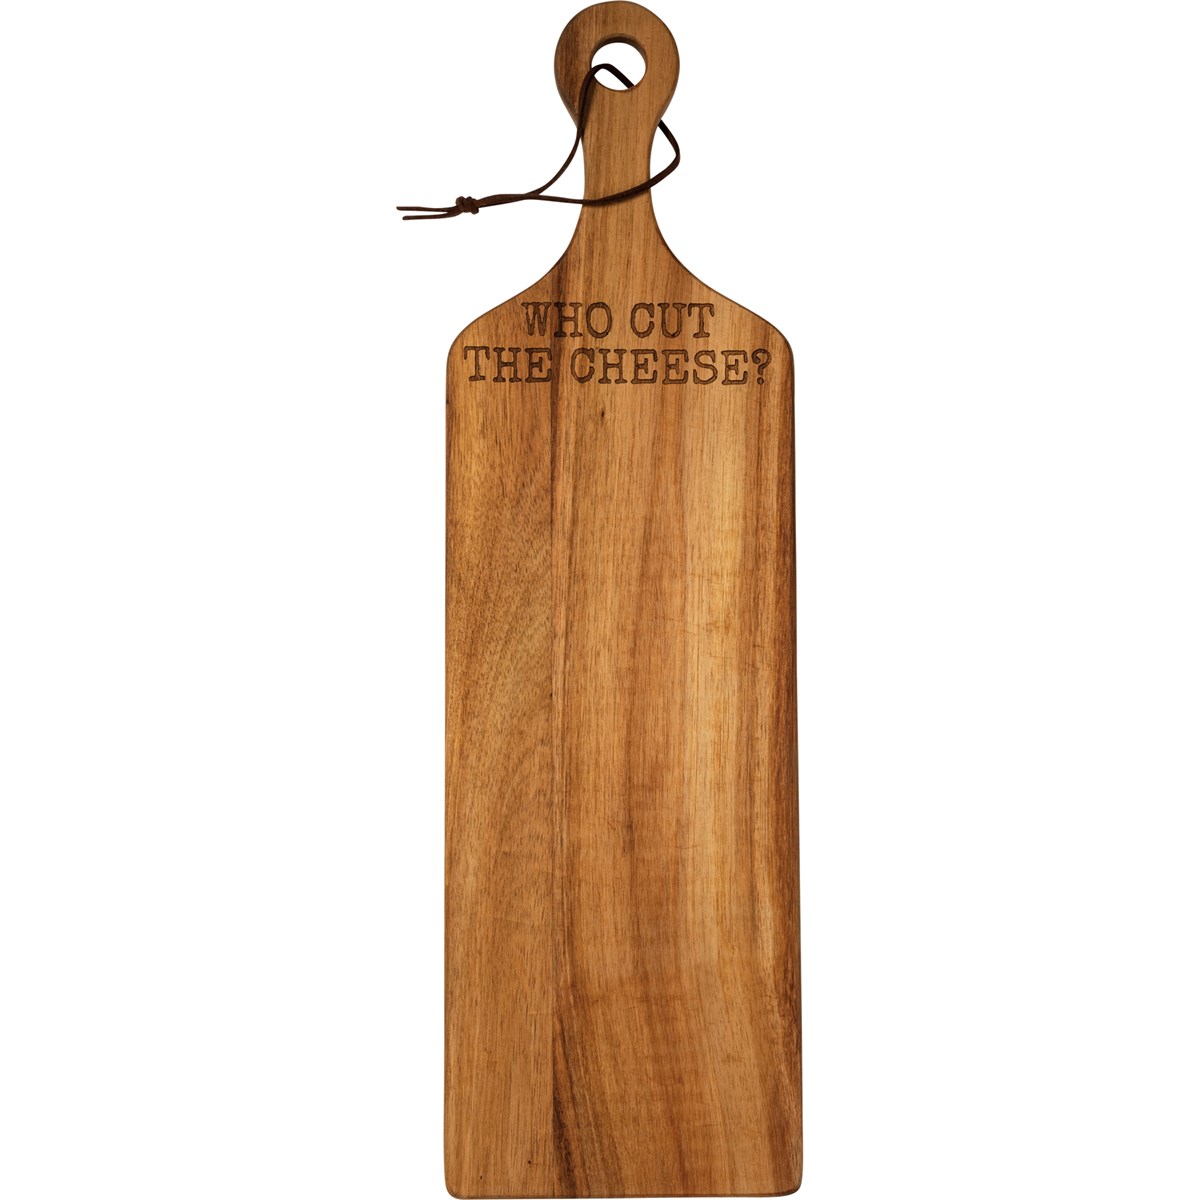 Who Cut The Cheese Cutting Board - Wood, Leather